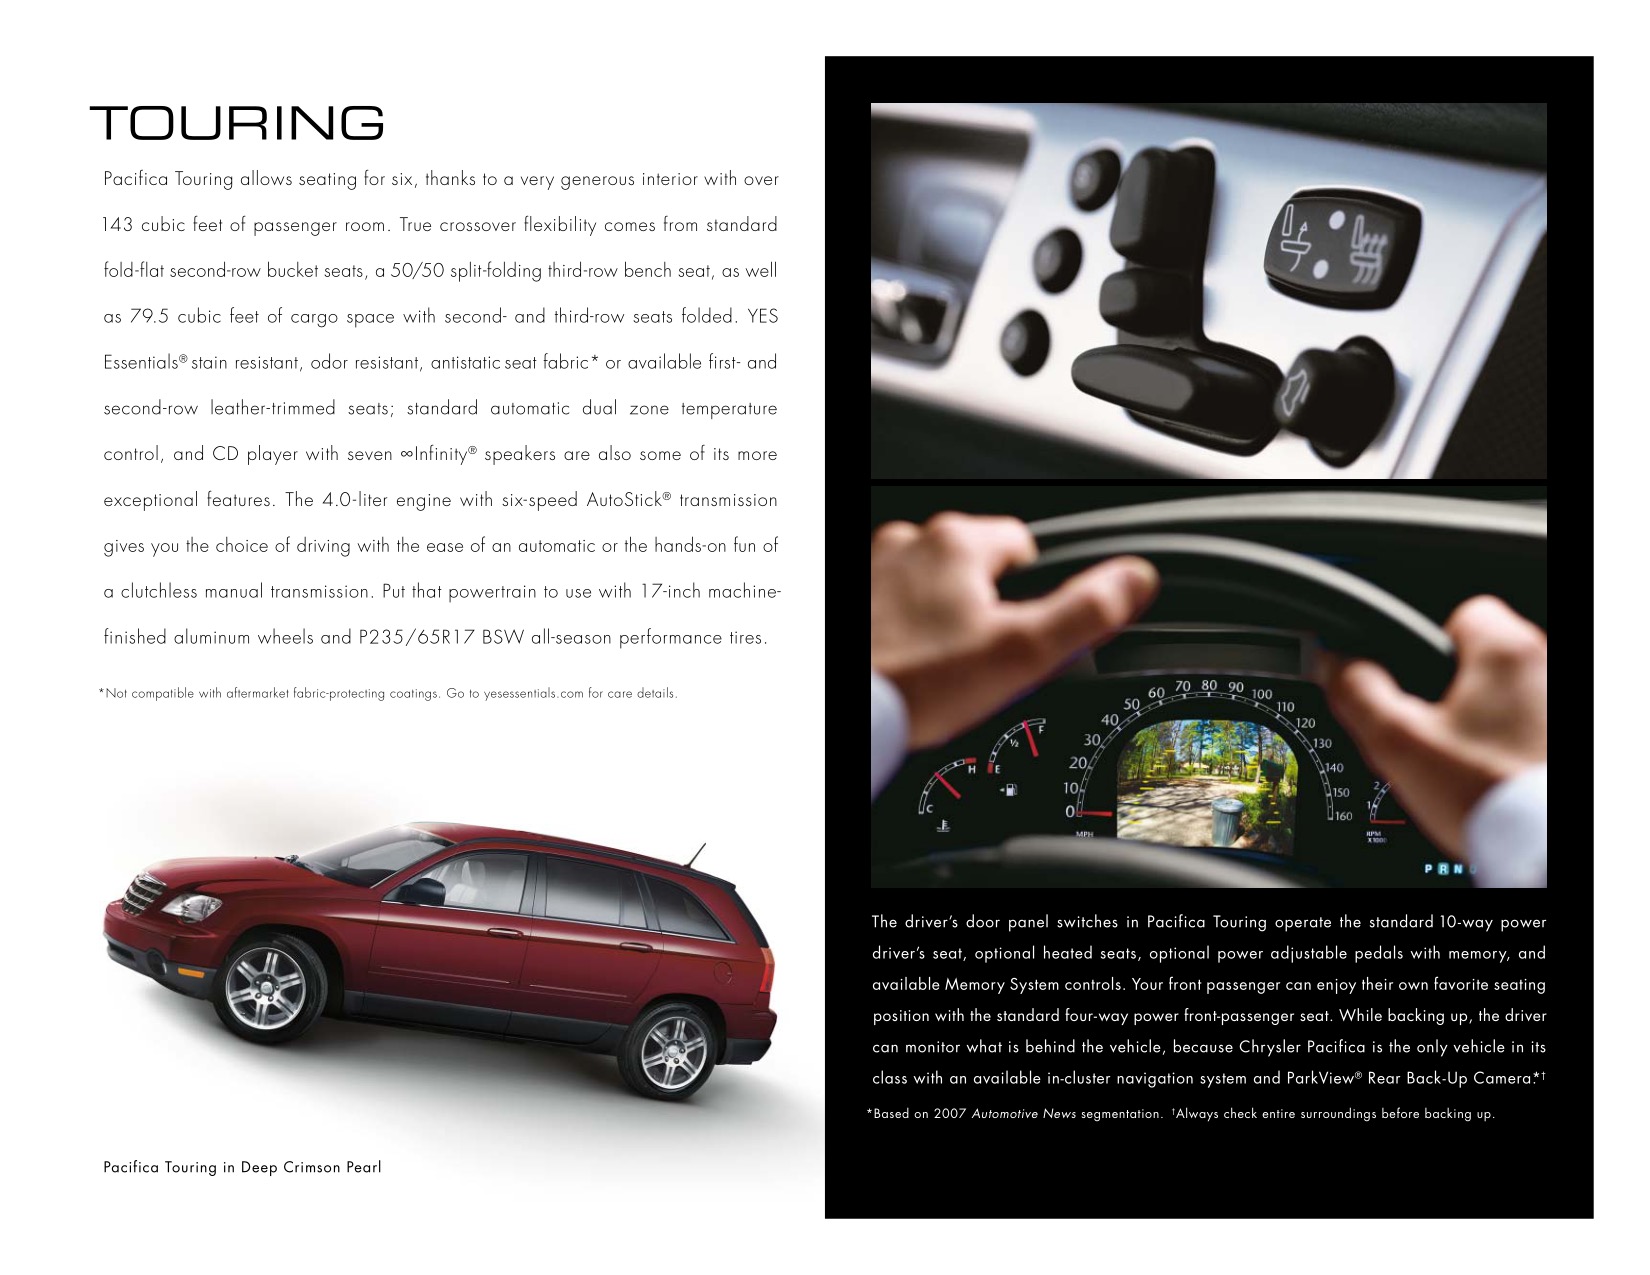 2008 Chrysler Pacifica Brochure Page 9